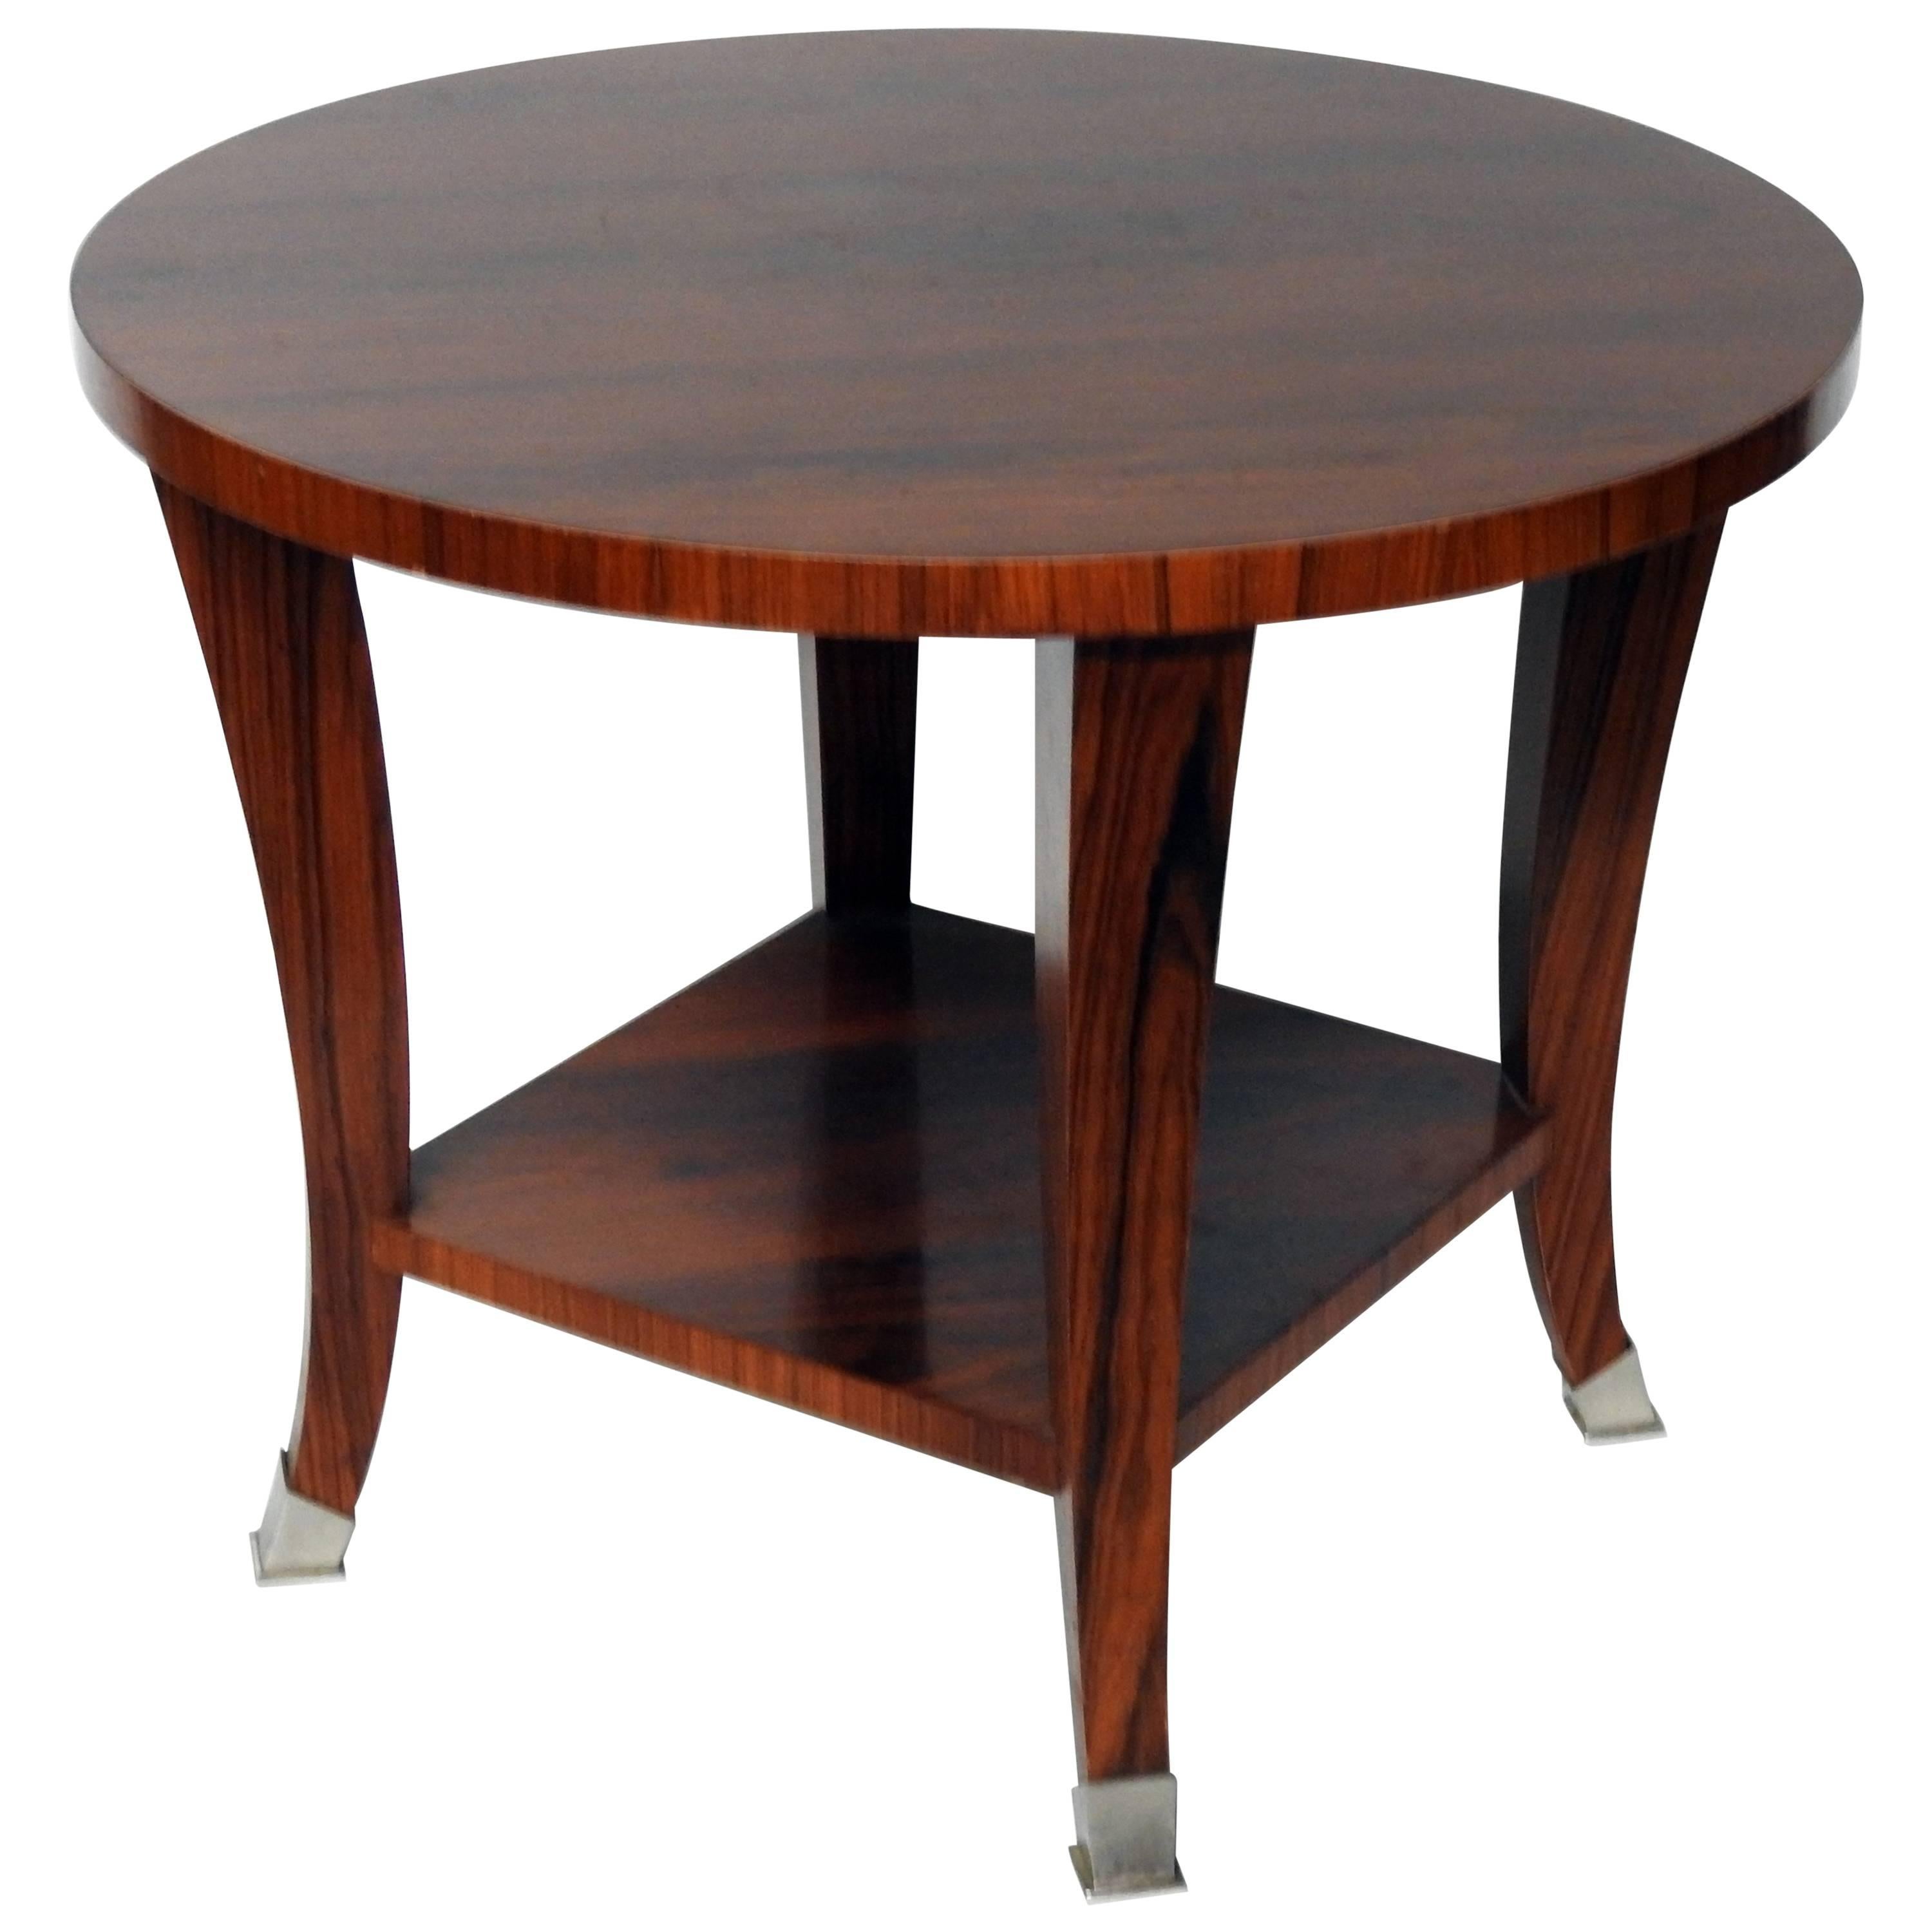 Barbara Barry Collection Art Deco Style Table For Sale